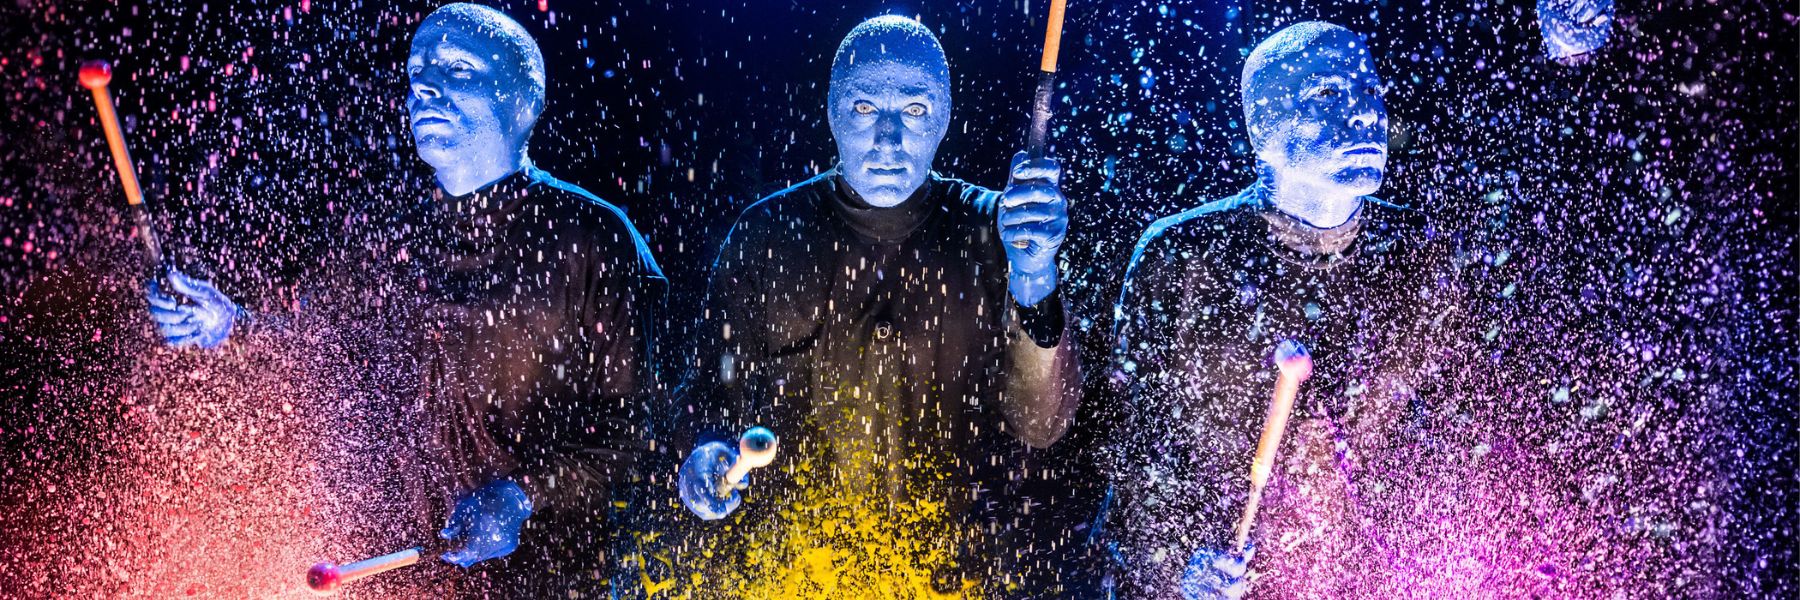 A performance by the Blue Man Group made it onto our list of 15 Things to Do in St. Louis This February.